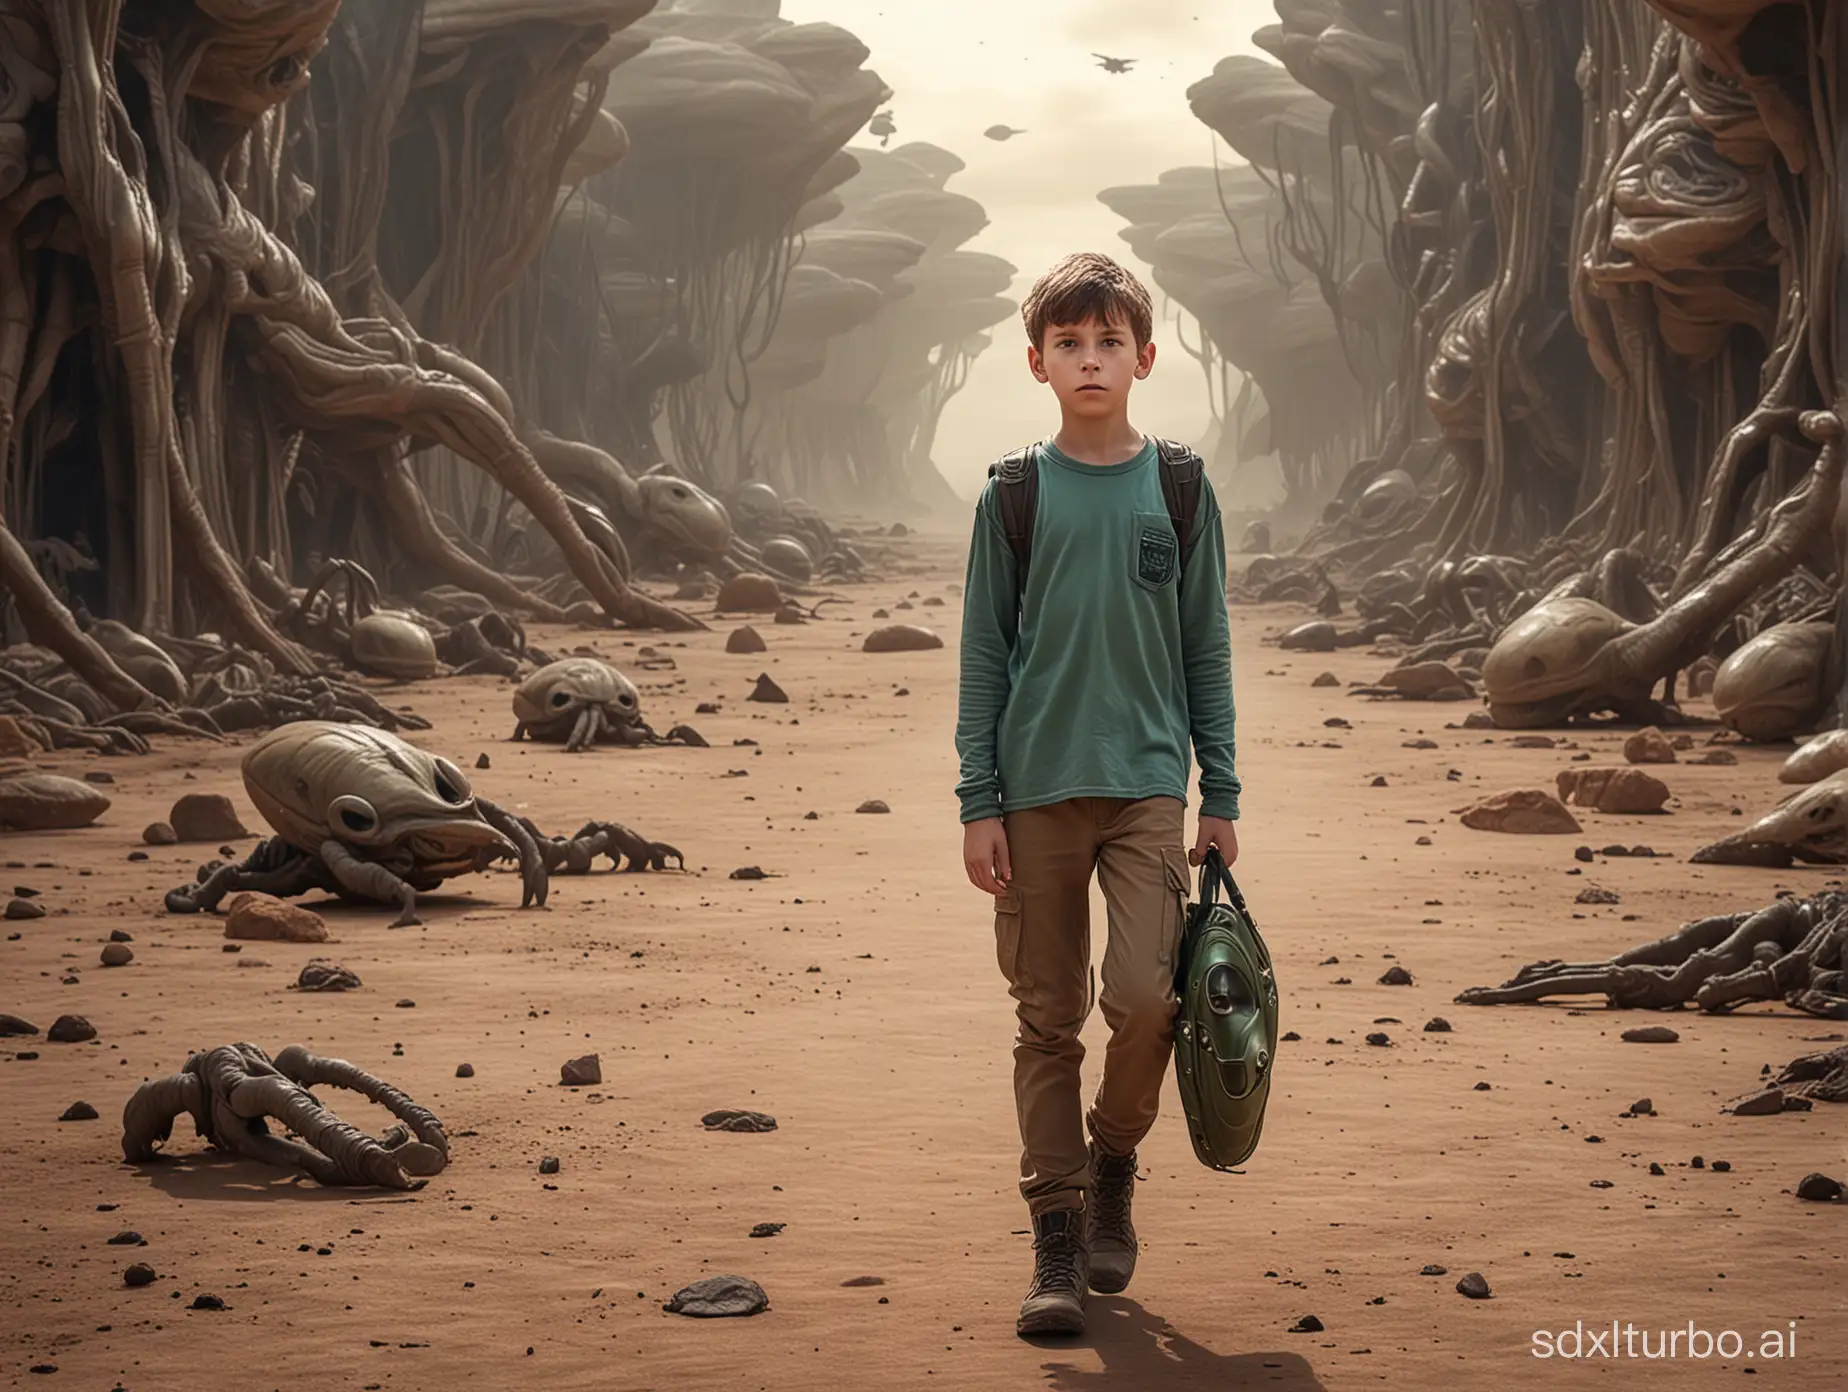 Lost-Young-Boy-in-Mysterious-Alien-Landscape